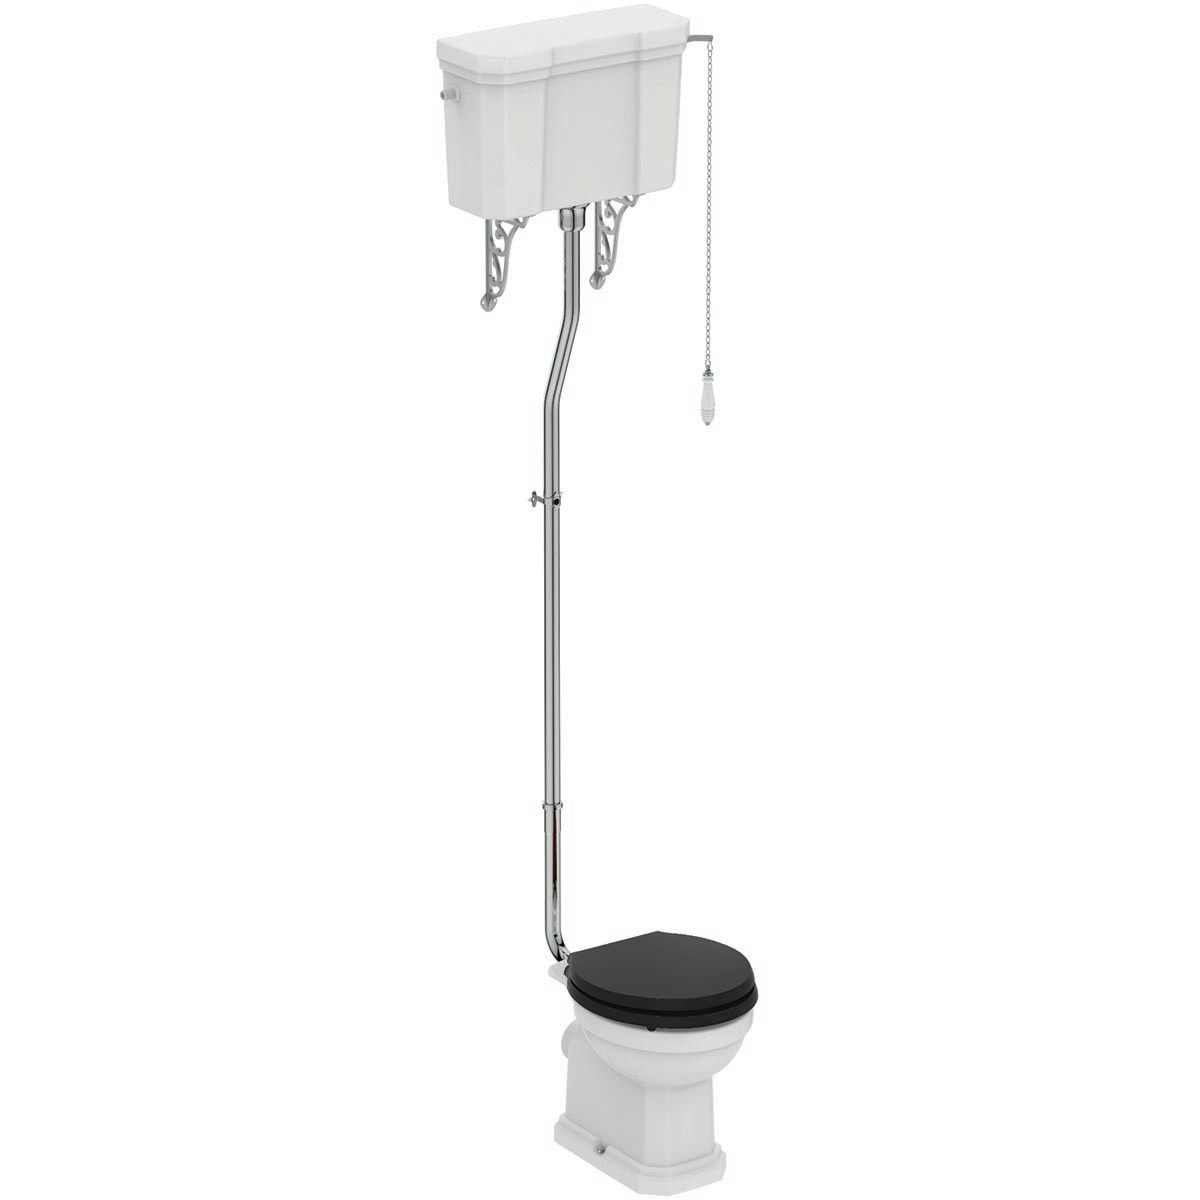 Ideal Standard Waverley high level toilet with black toilet seat